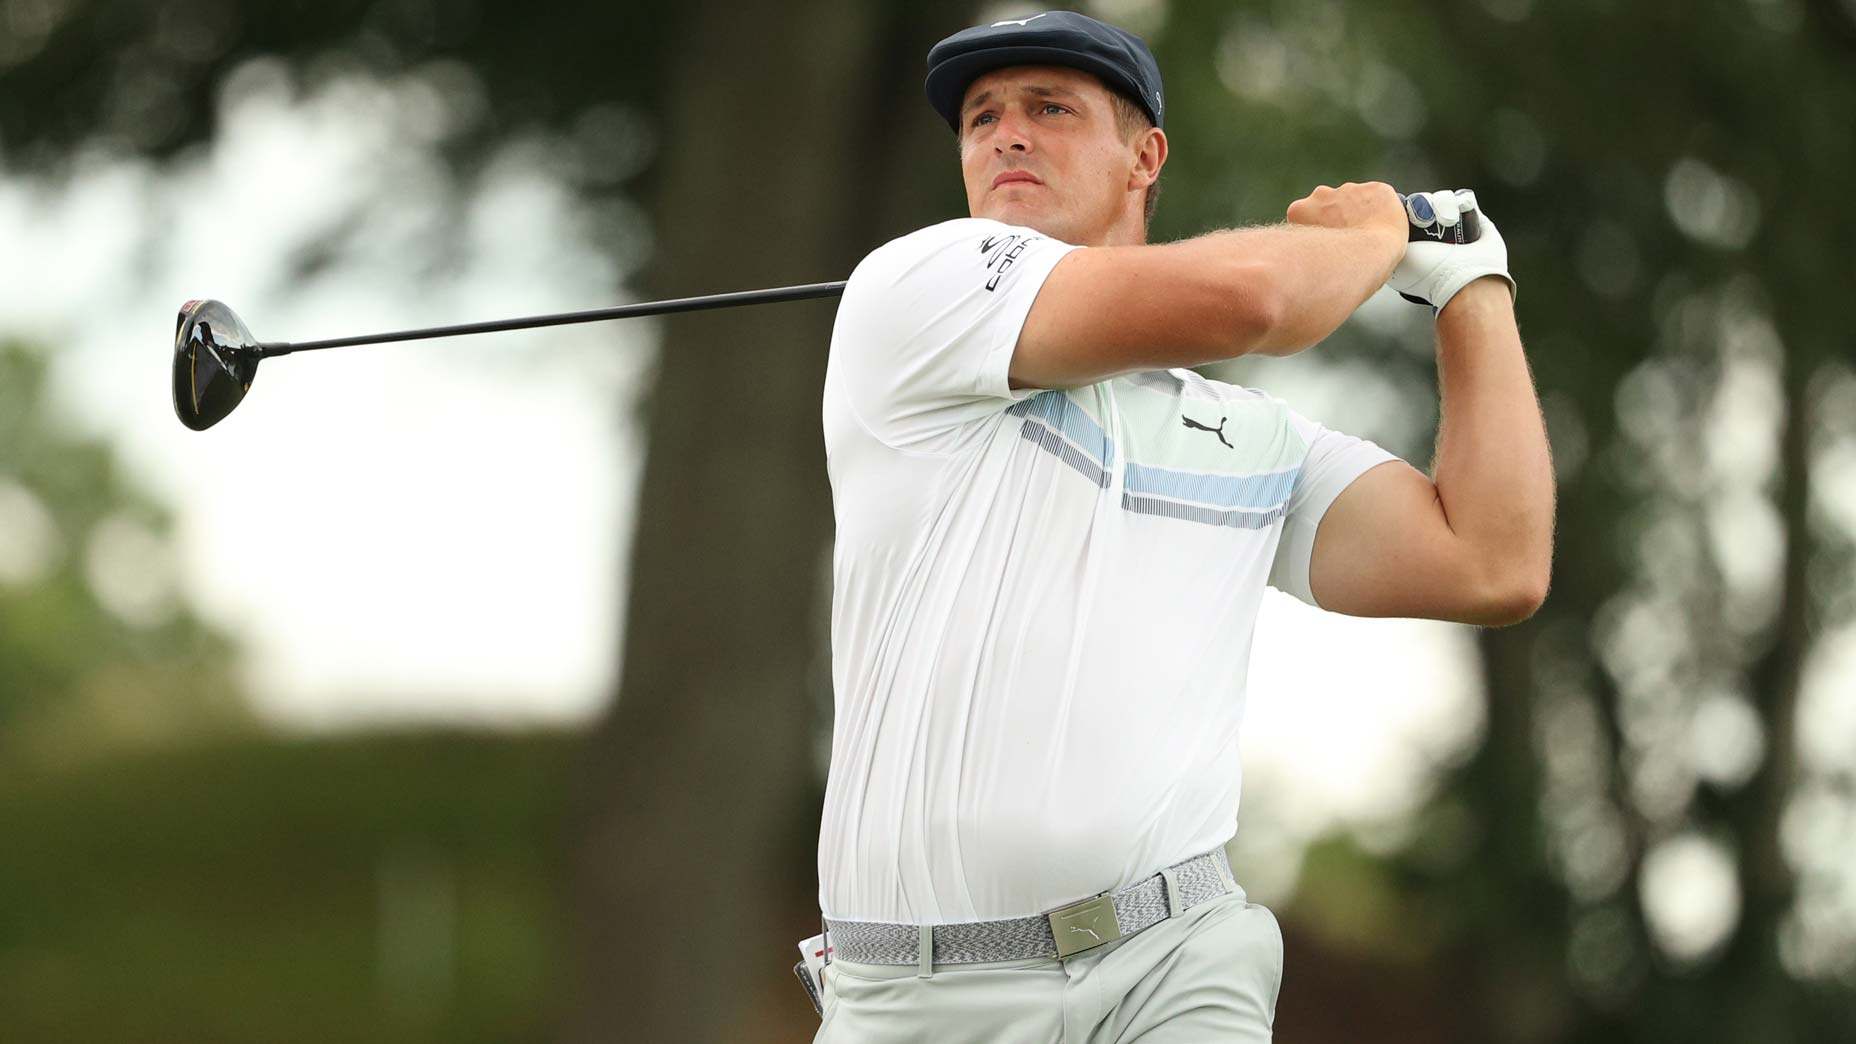 Bryson DeChambeau Finishes Strong, He's One Shot Back In Detroit